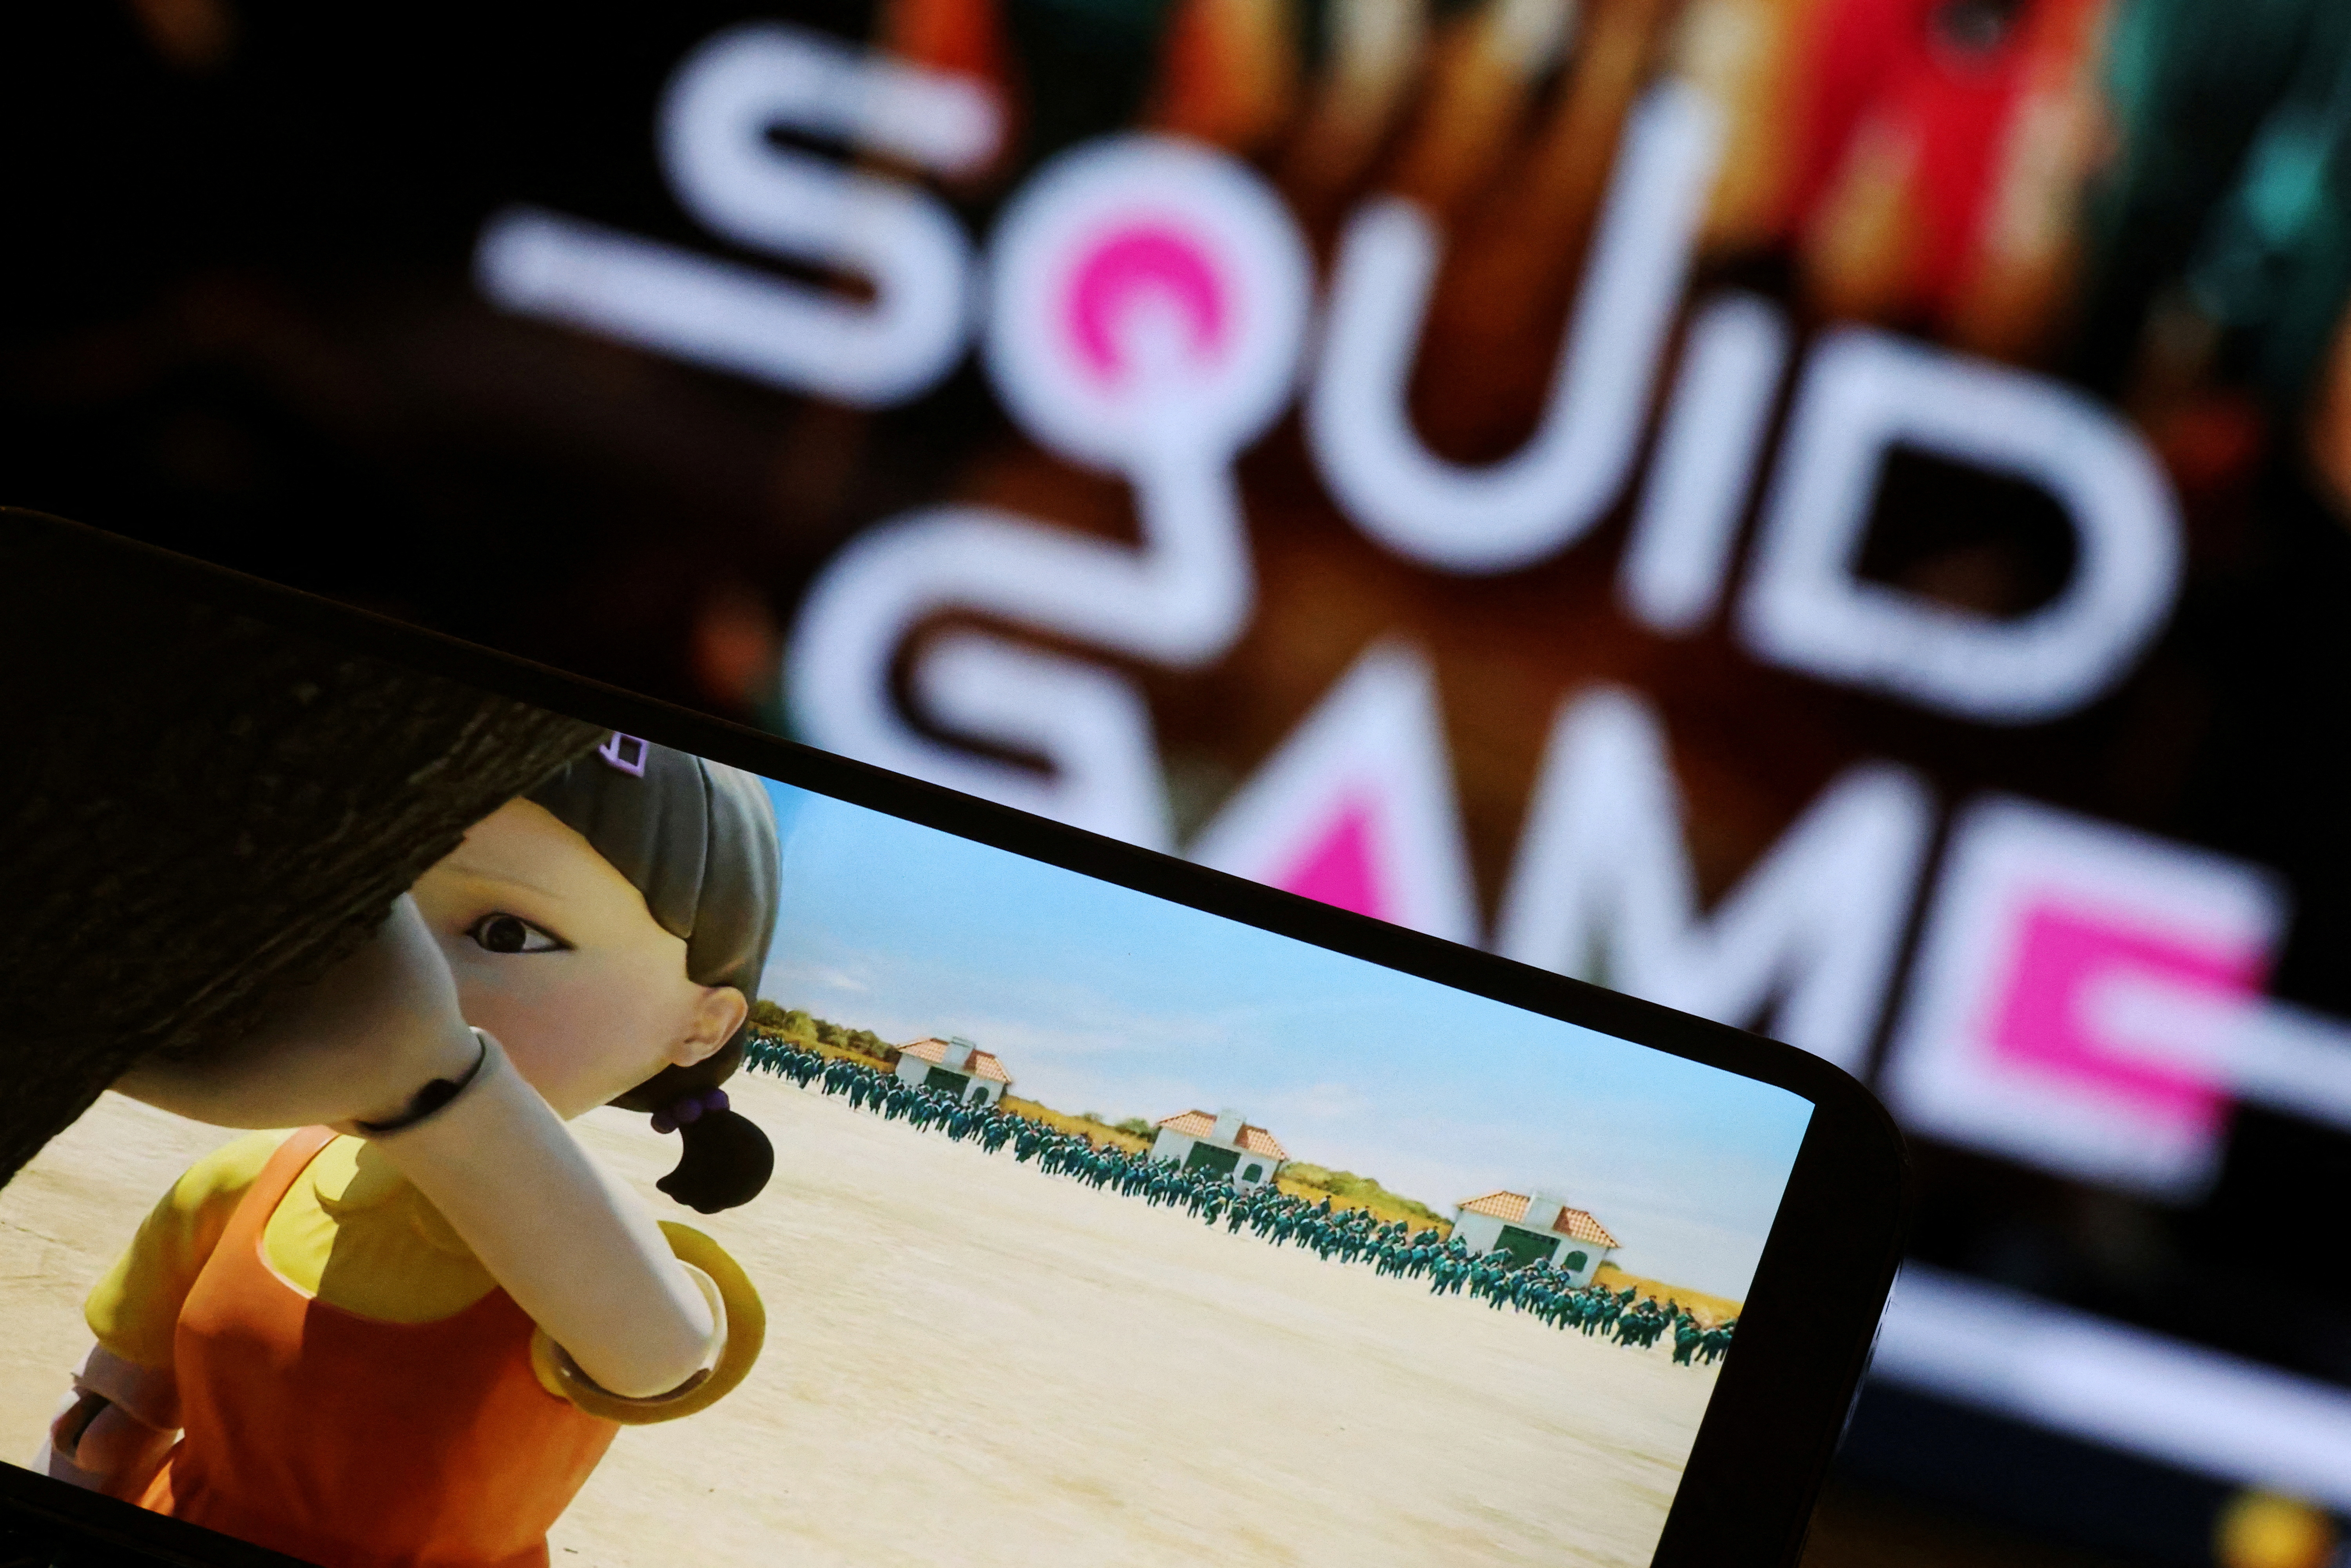 What are the concerns around Netflix's Squid Game?